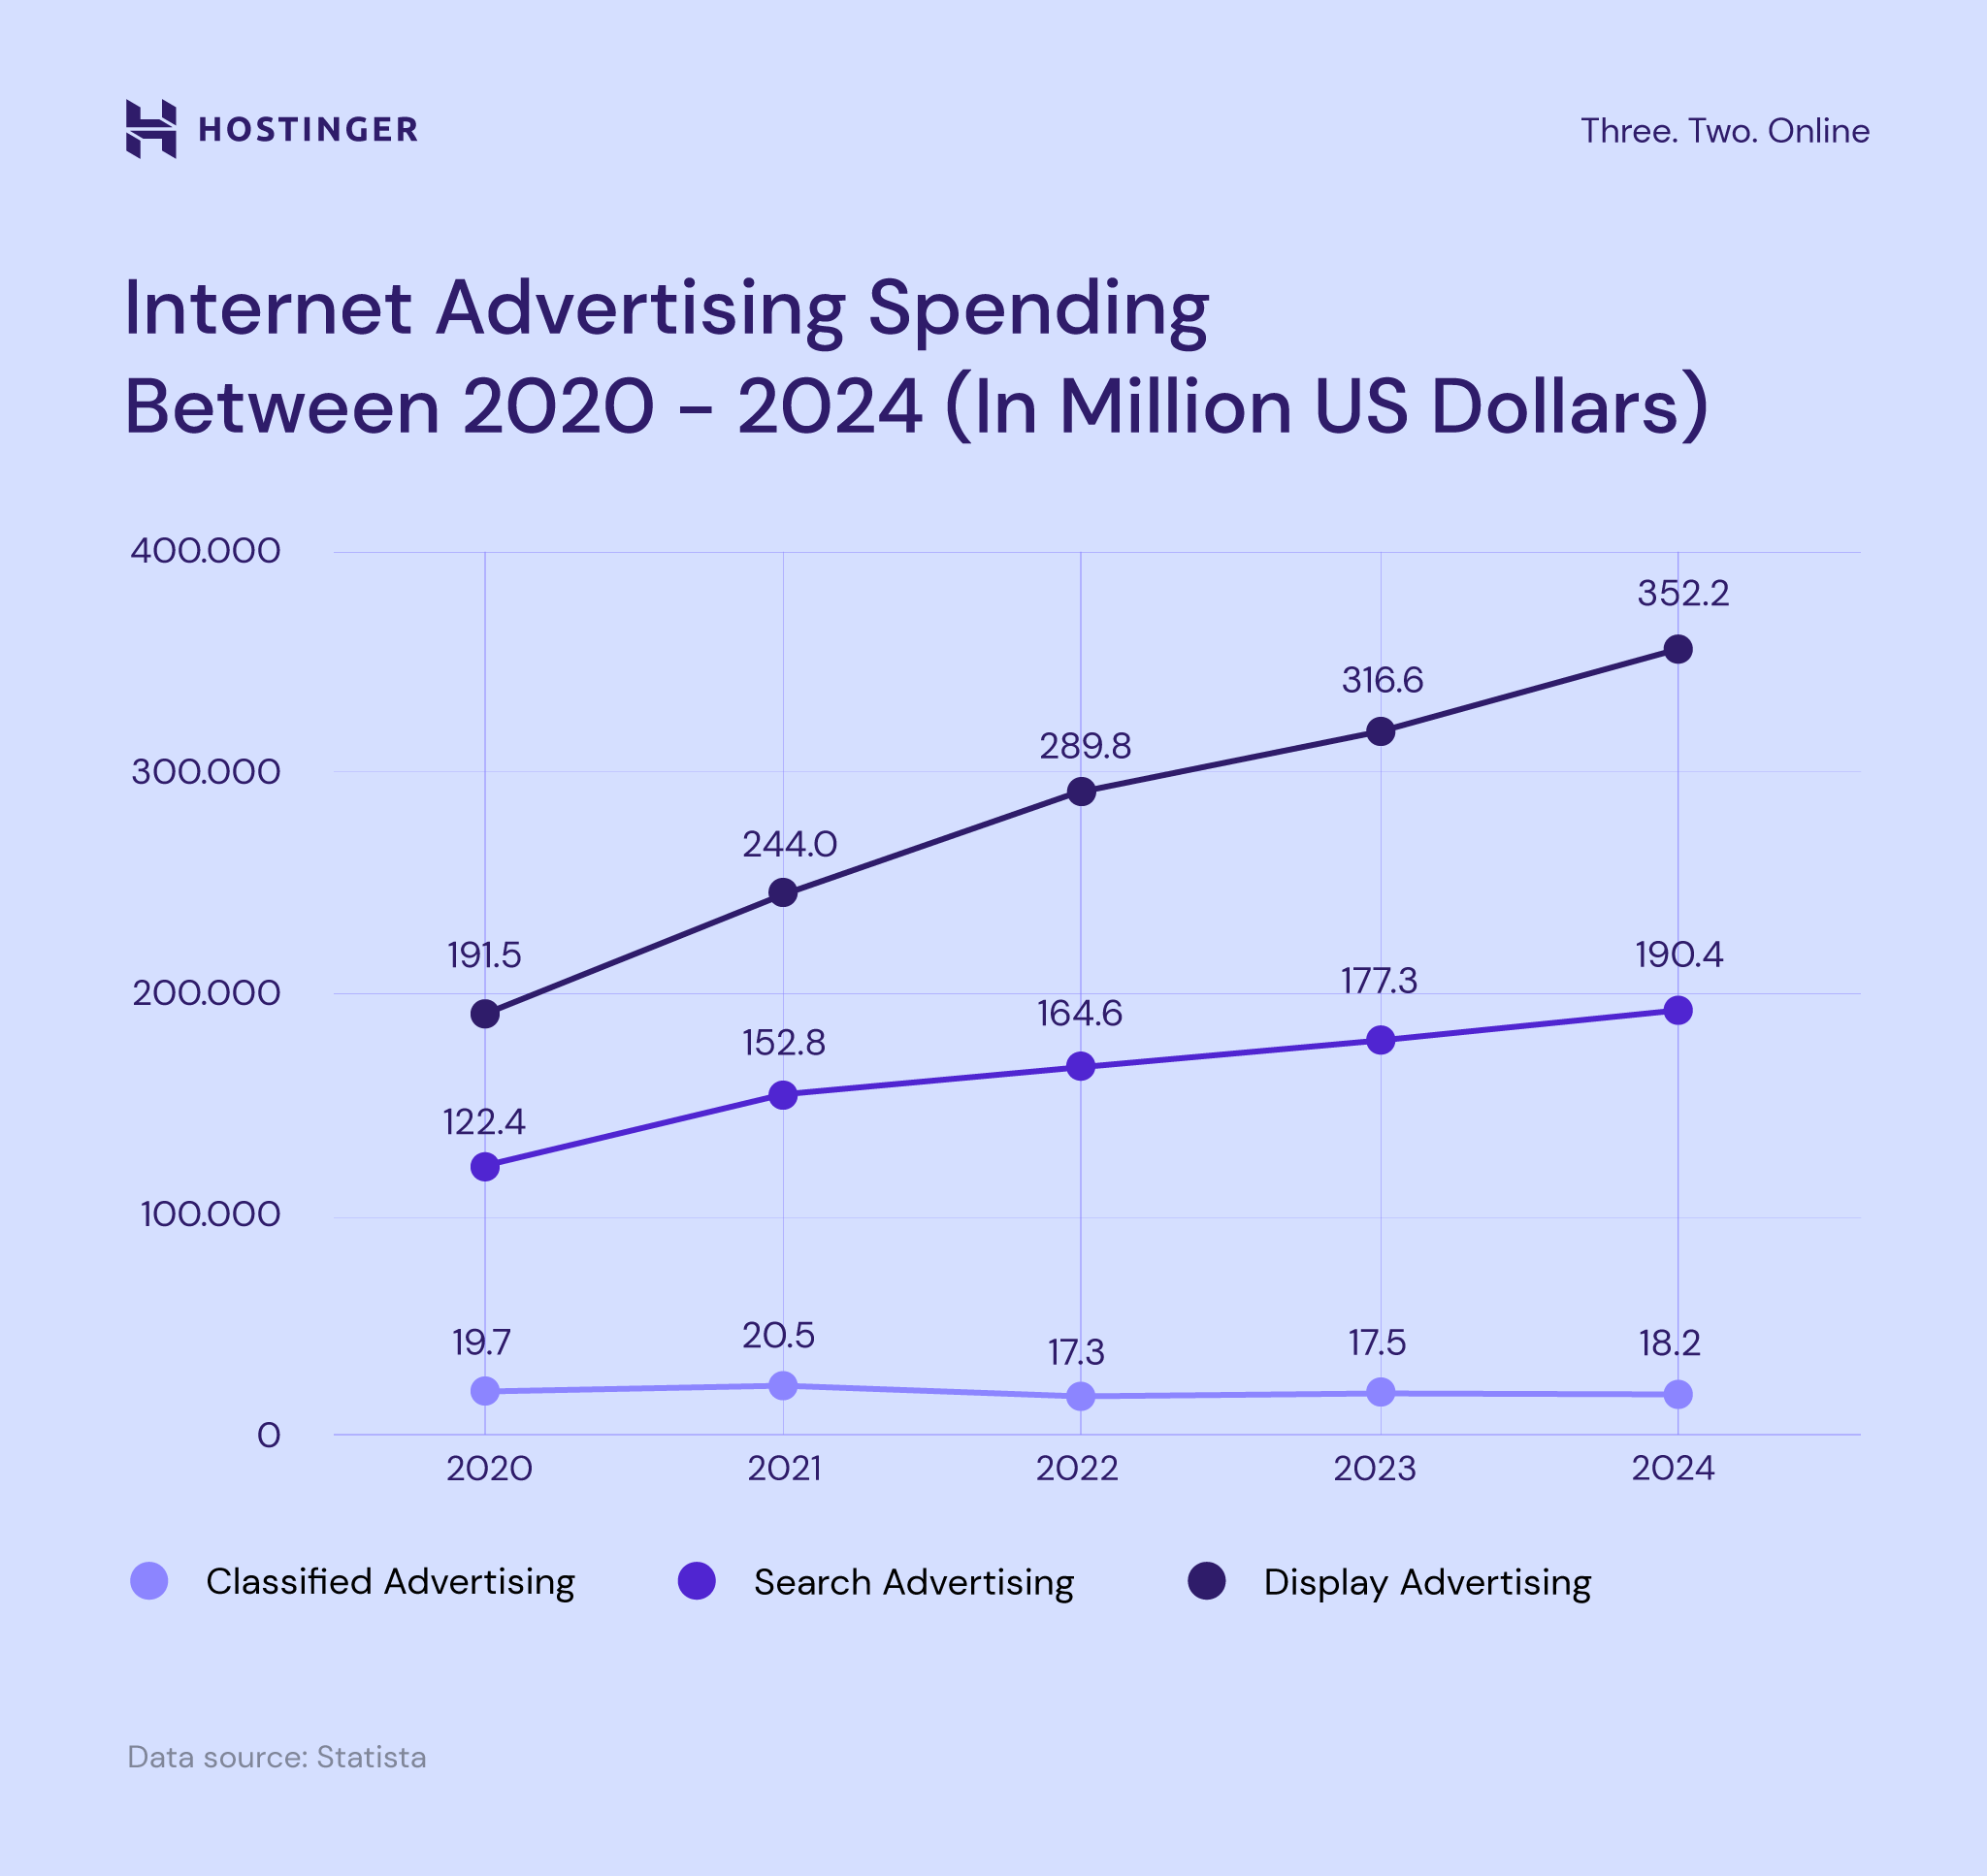 Internet ad spending share between 2020 to 2024
